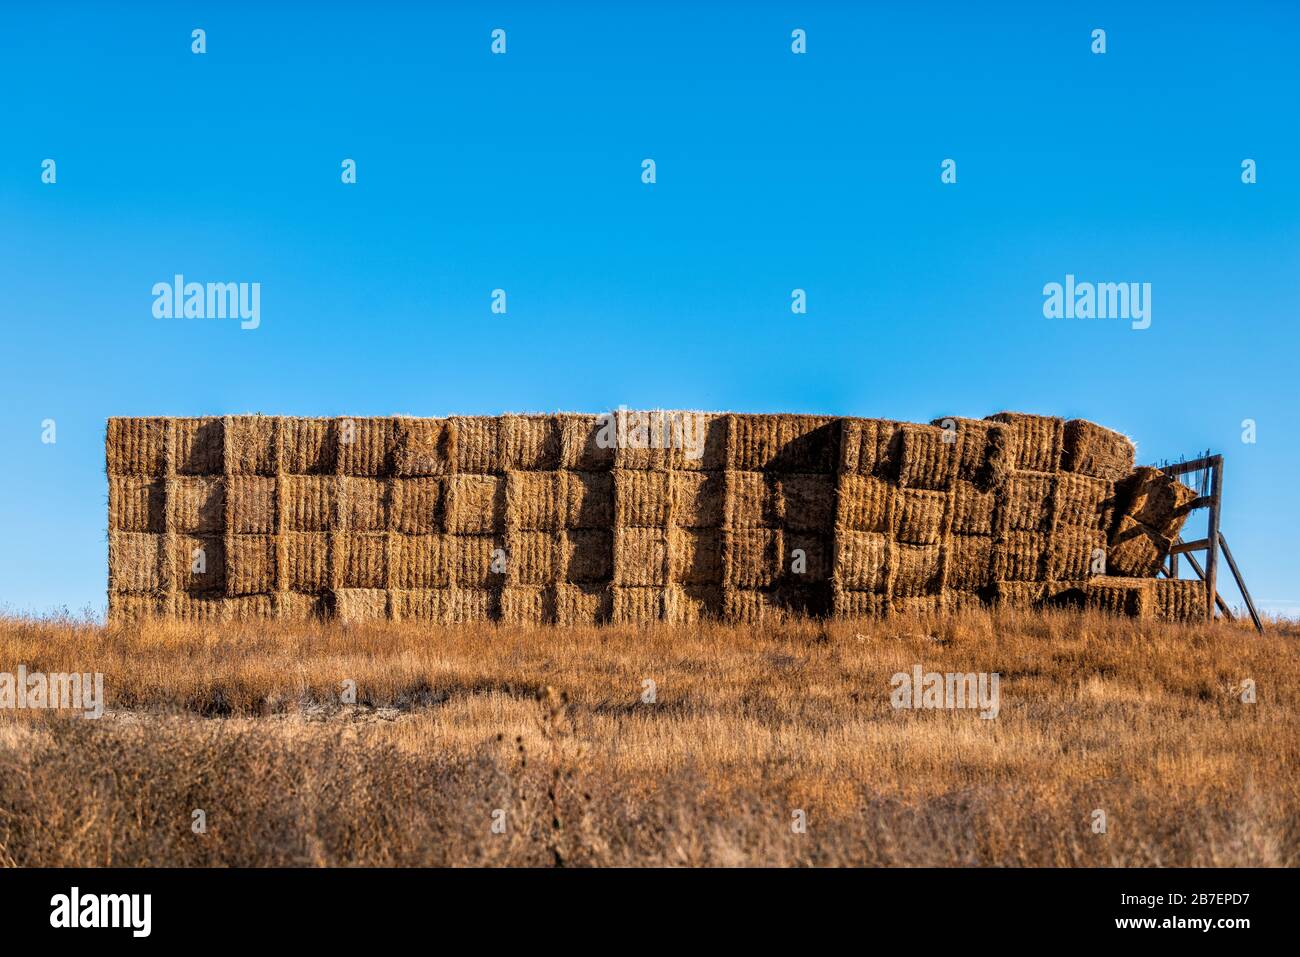 Hay stack bales near small town of La Junta, Colorado with rural farm countryside in Otero county and blue sky landscape Stock Photo